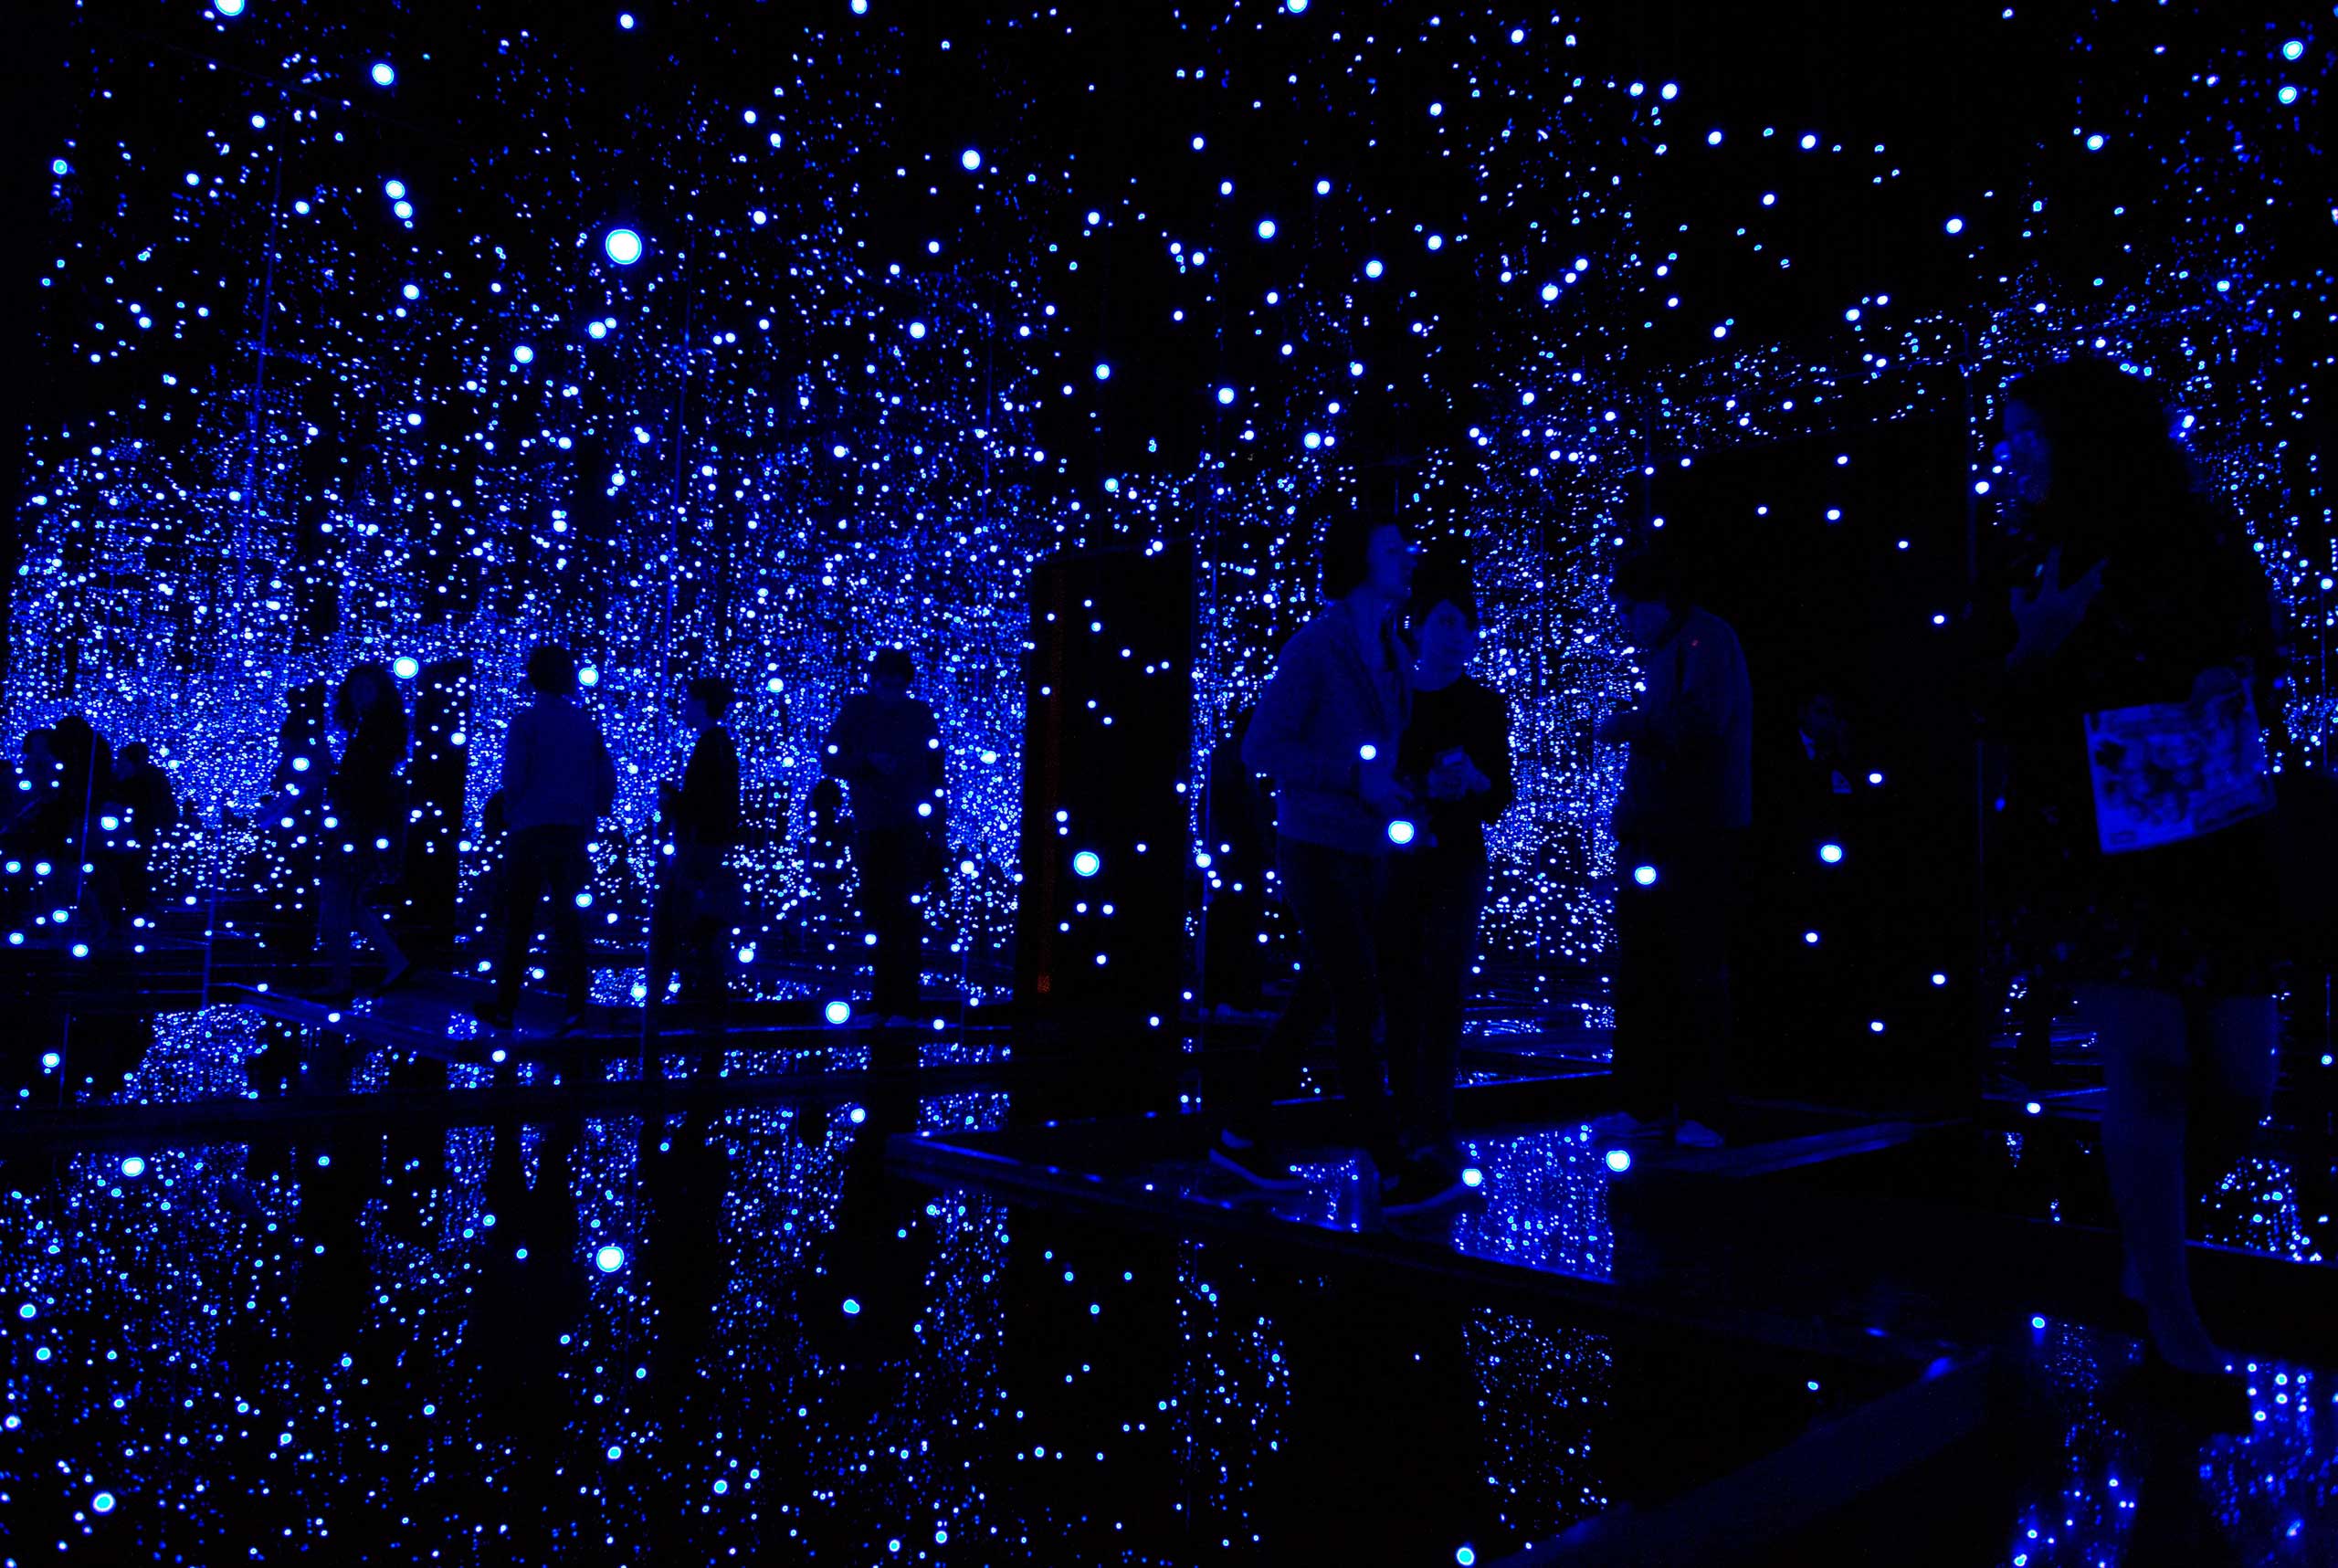 Sept. 23, 2014. Journalists walk through an installation by Japanese artist Yayoi Kusama during a press tour of her  Infinite Obsession,  exhibit, at the Rufino Tamayo Museum in Mexico City, Mexico.